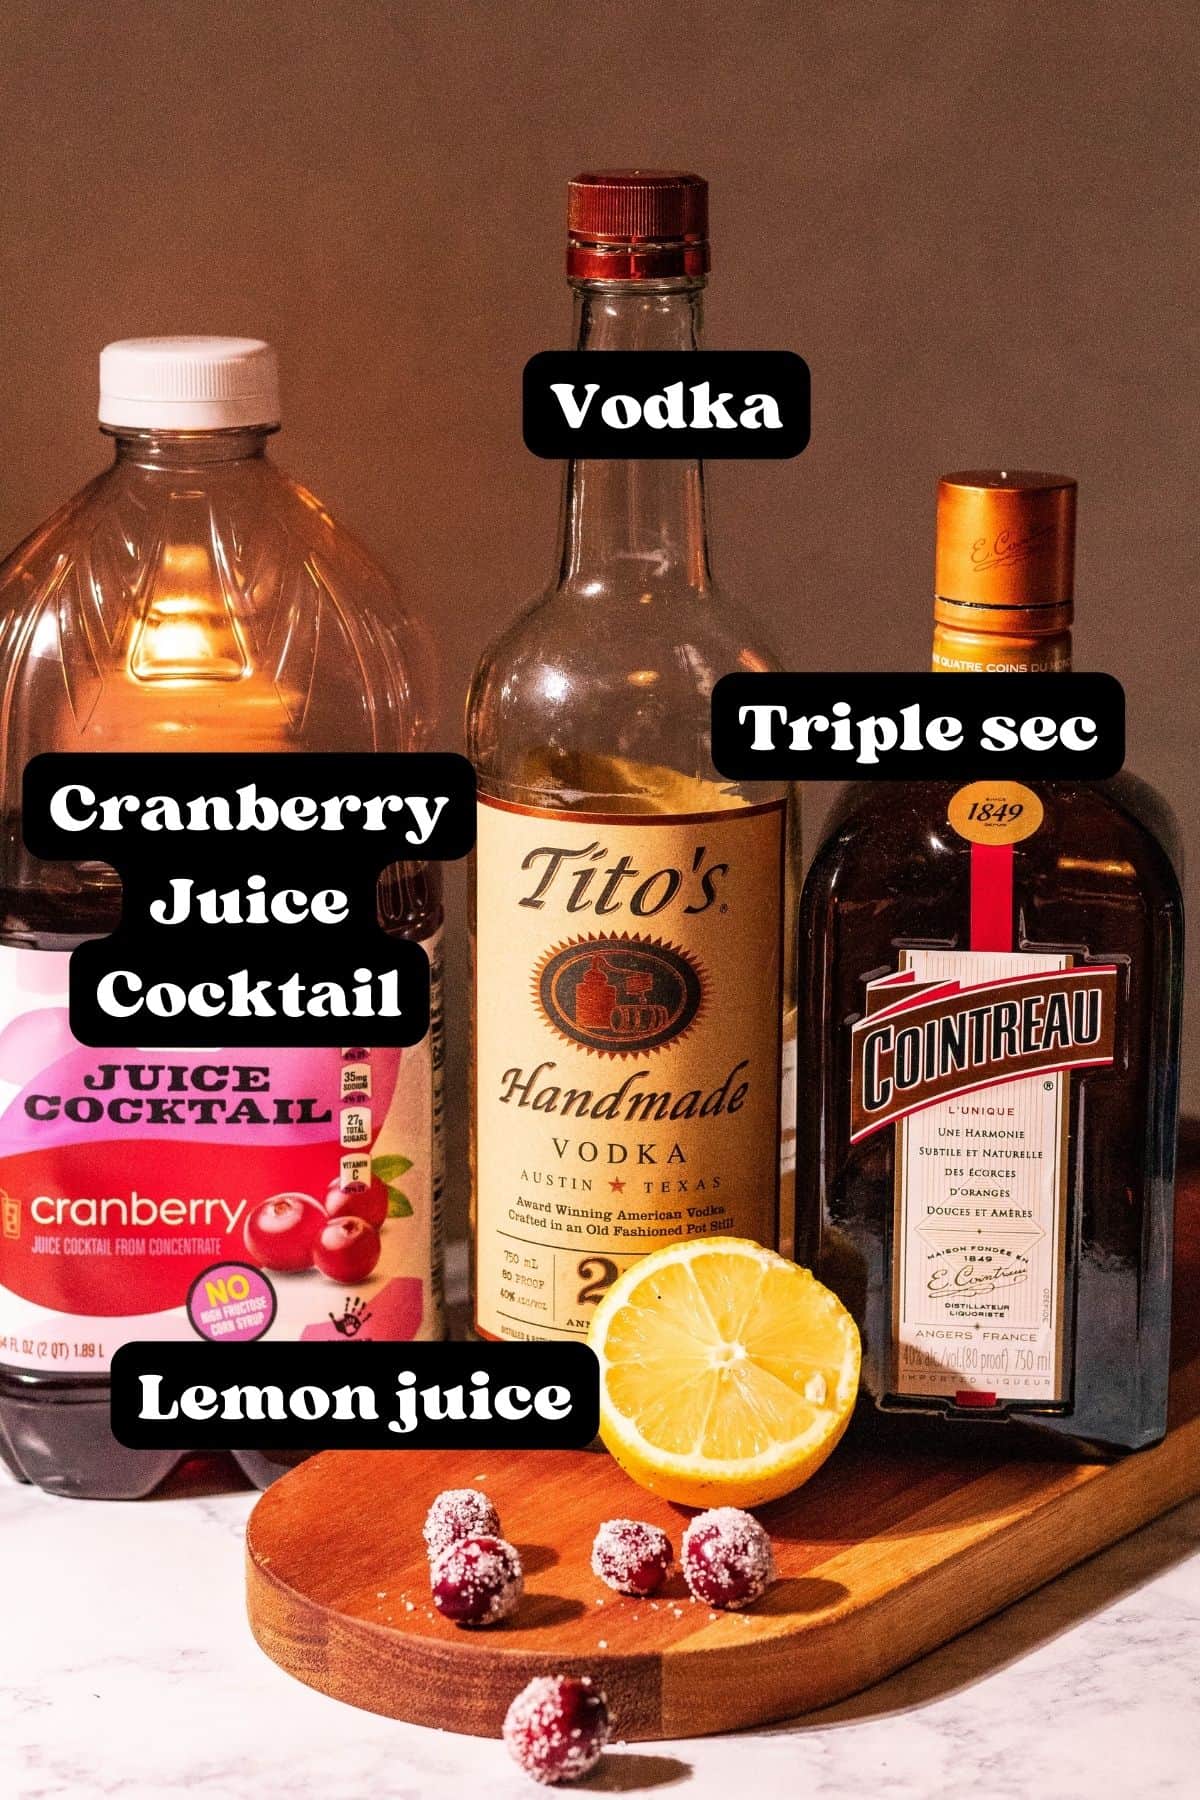 Ingredients for the martini shown including vodka, cranberry juice cocktail, lemon juice, and triple sec.